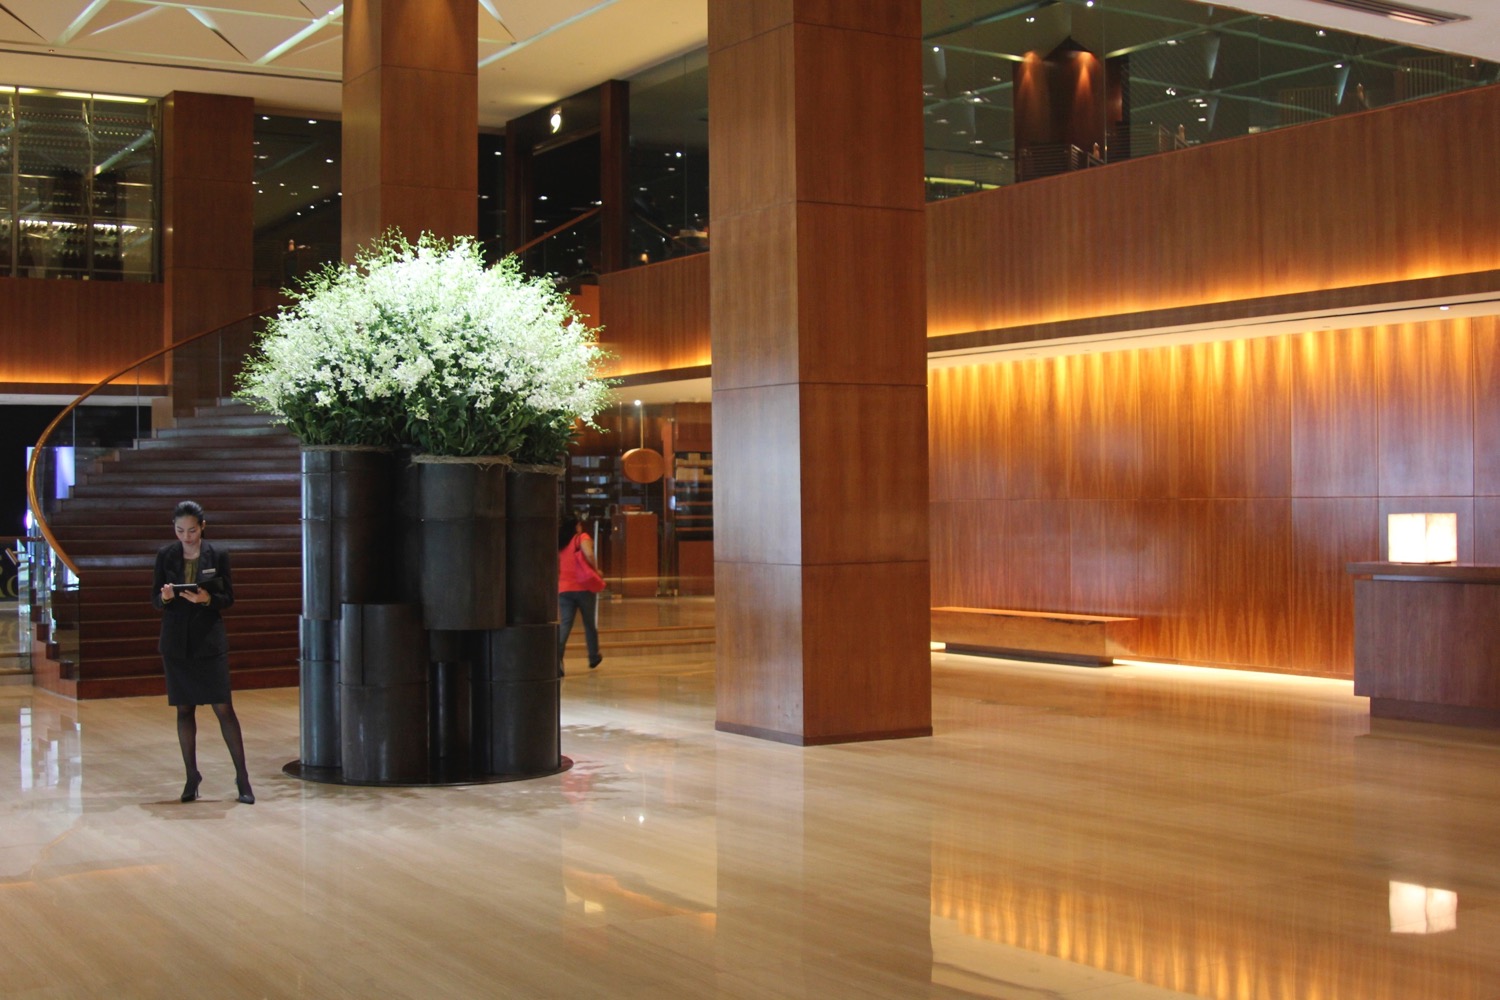 a large planter with white flowers in a large room